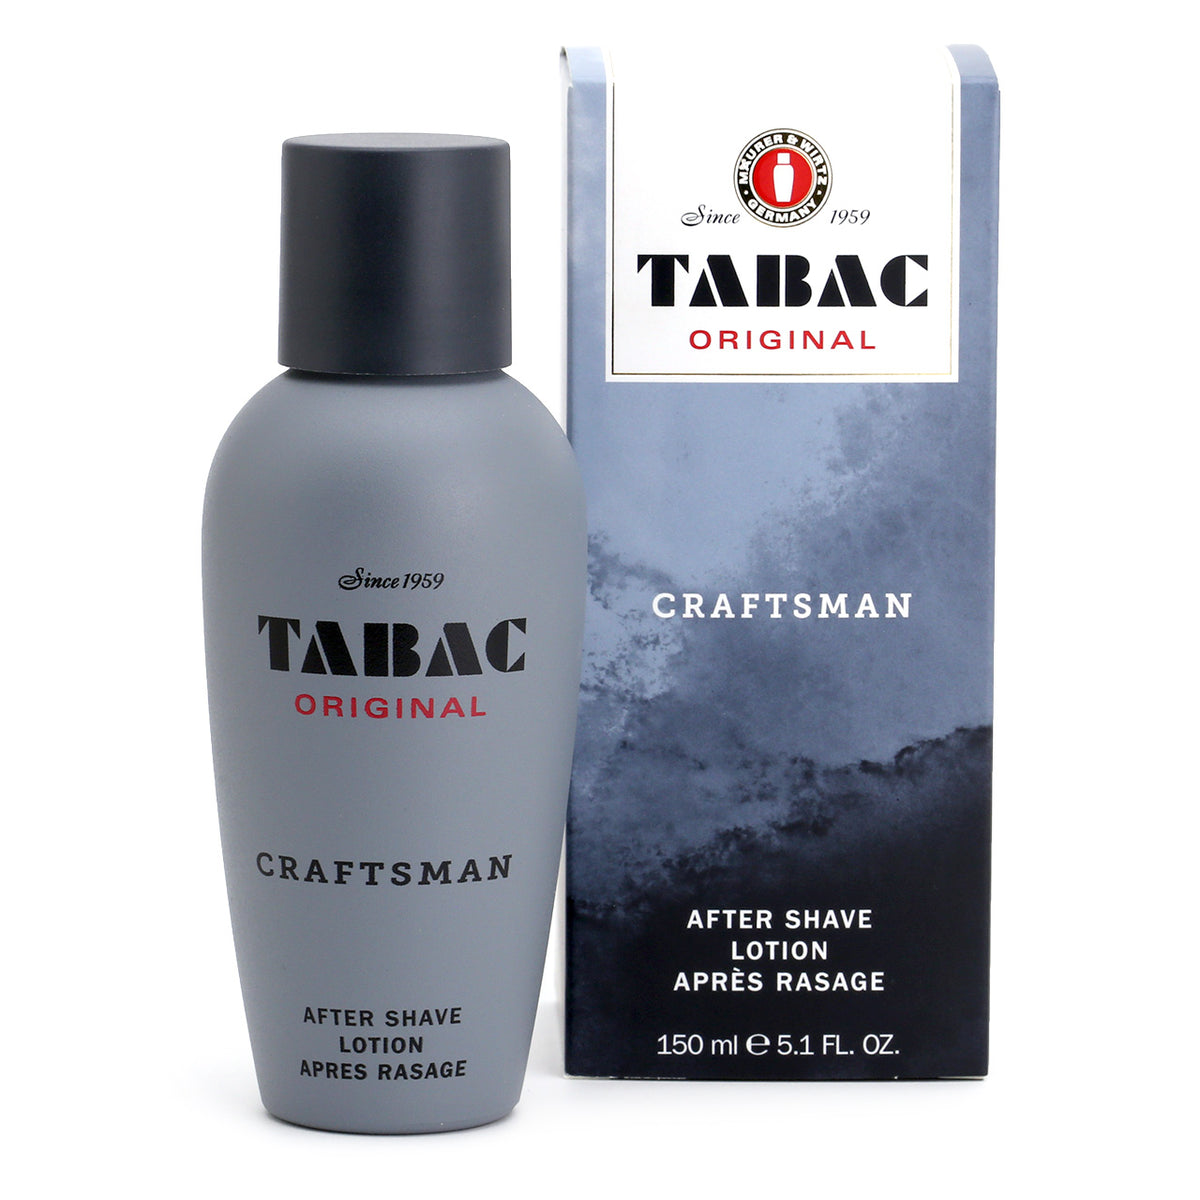 Tabac Original Craftsman Aftershave Lotion 150ml is packed in a heavy stone-like bottle